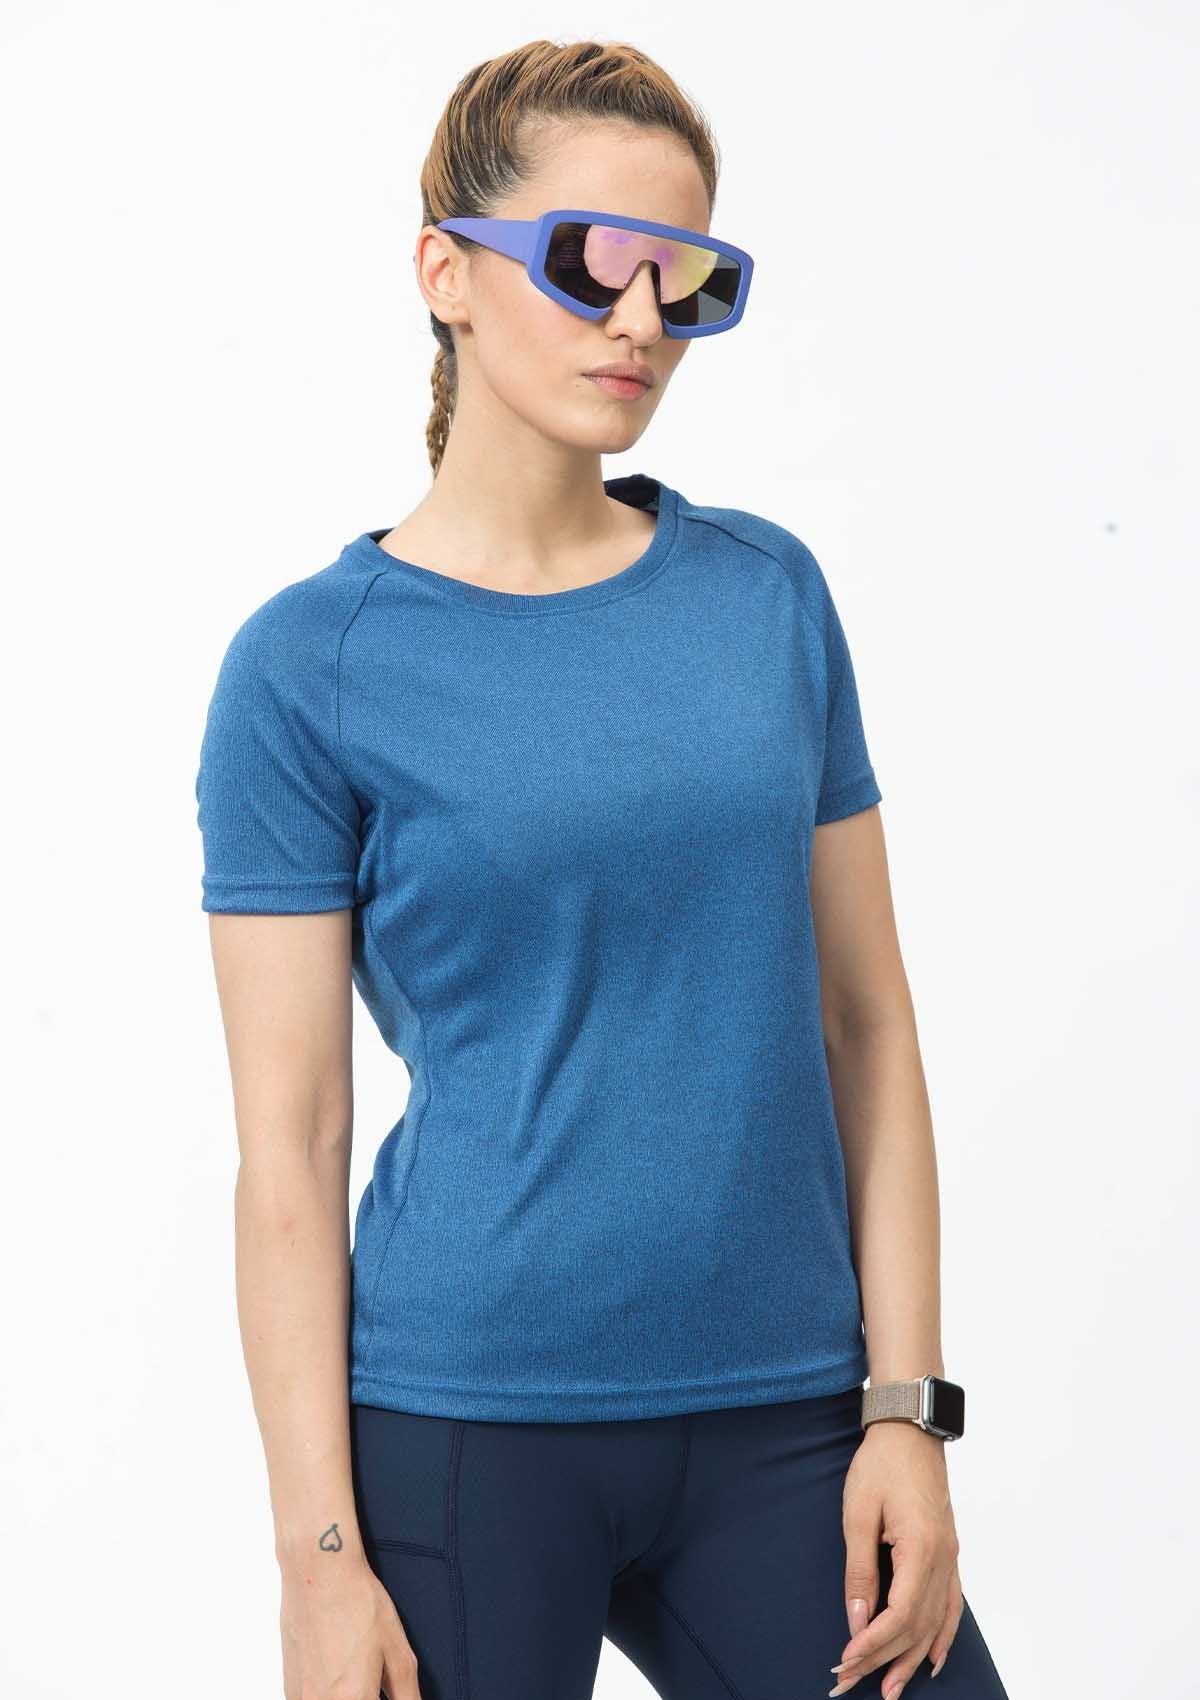 DRY FIT SHORT SLEEVES CREW-BLUE - Nomad Apparel